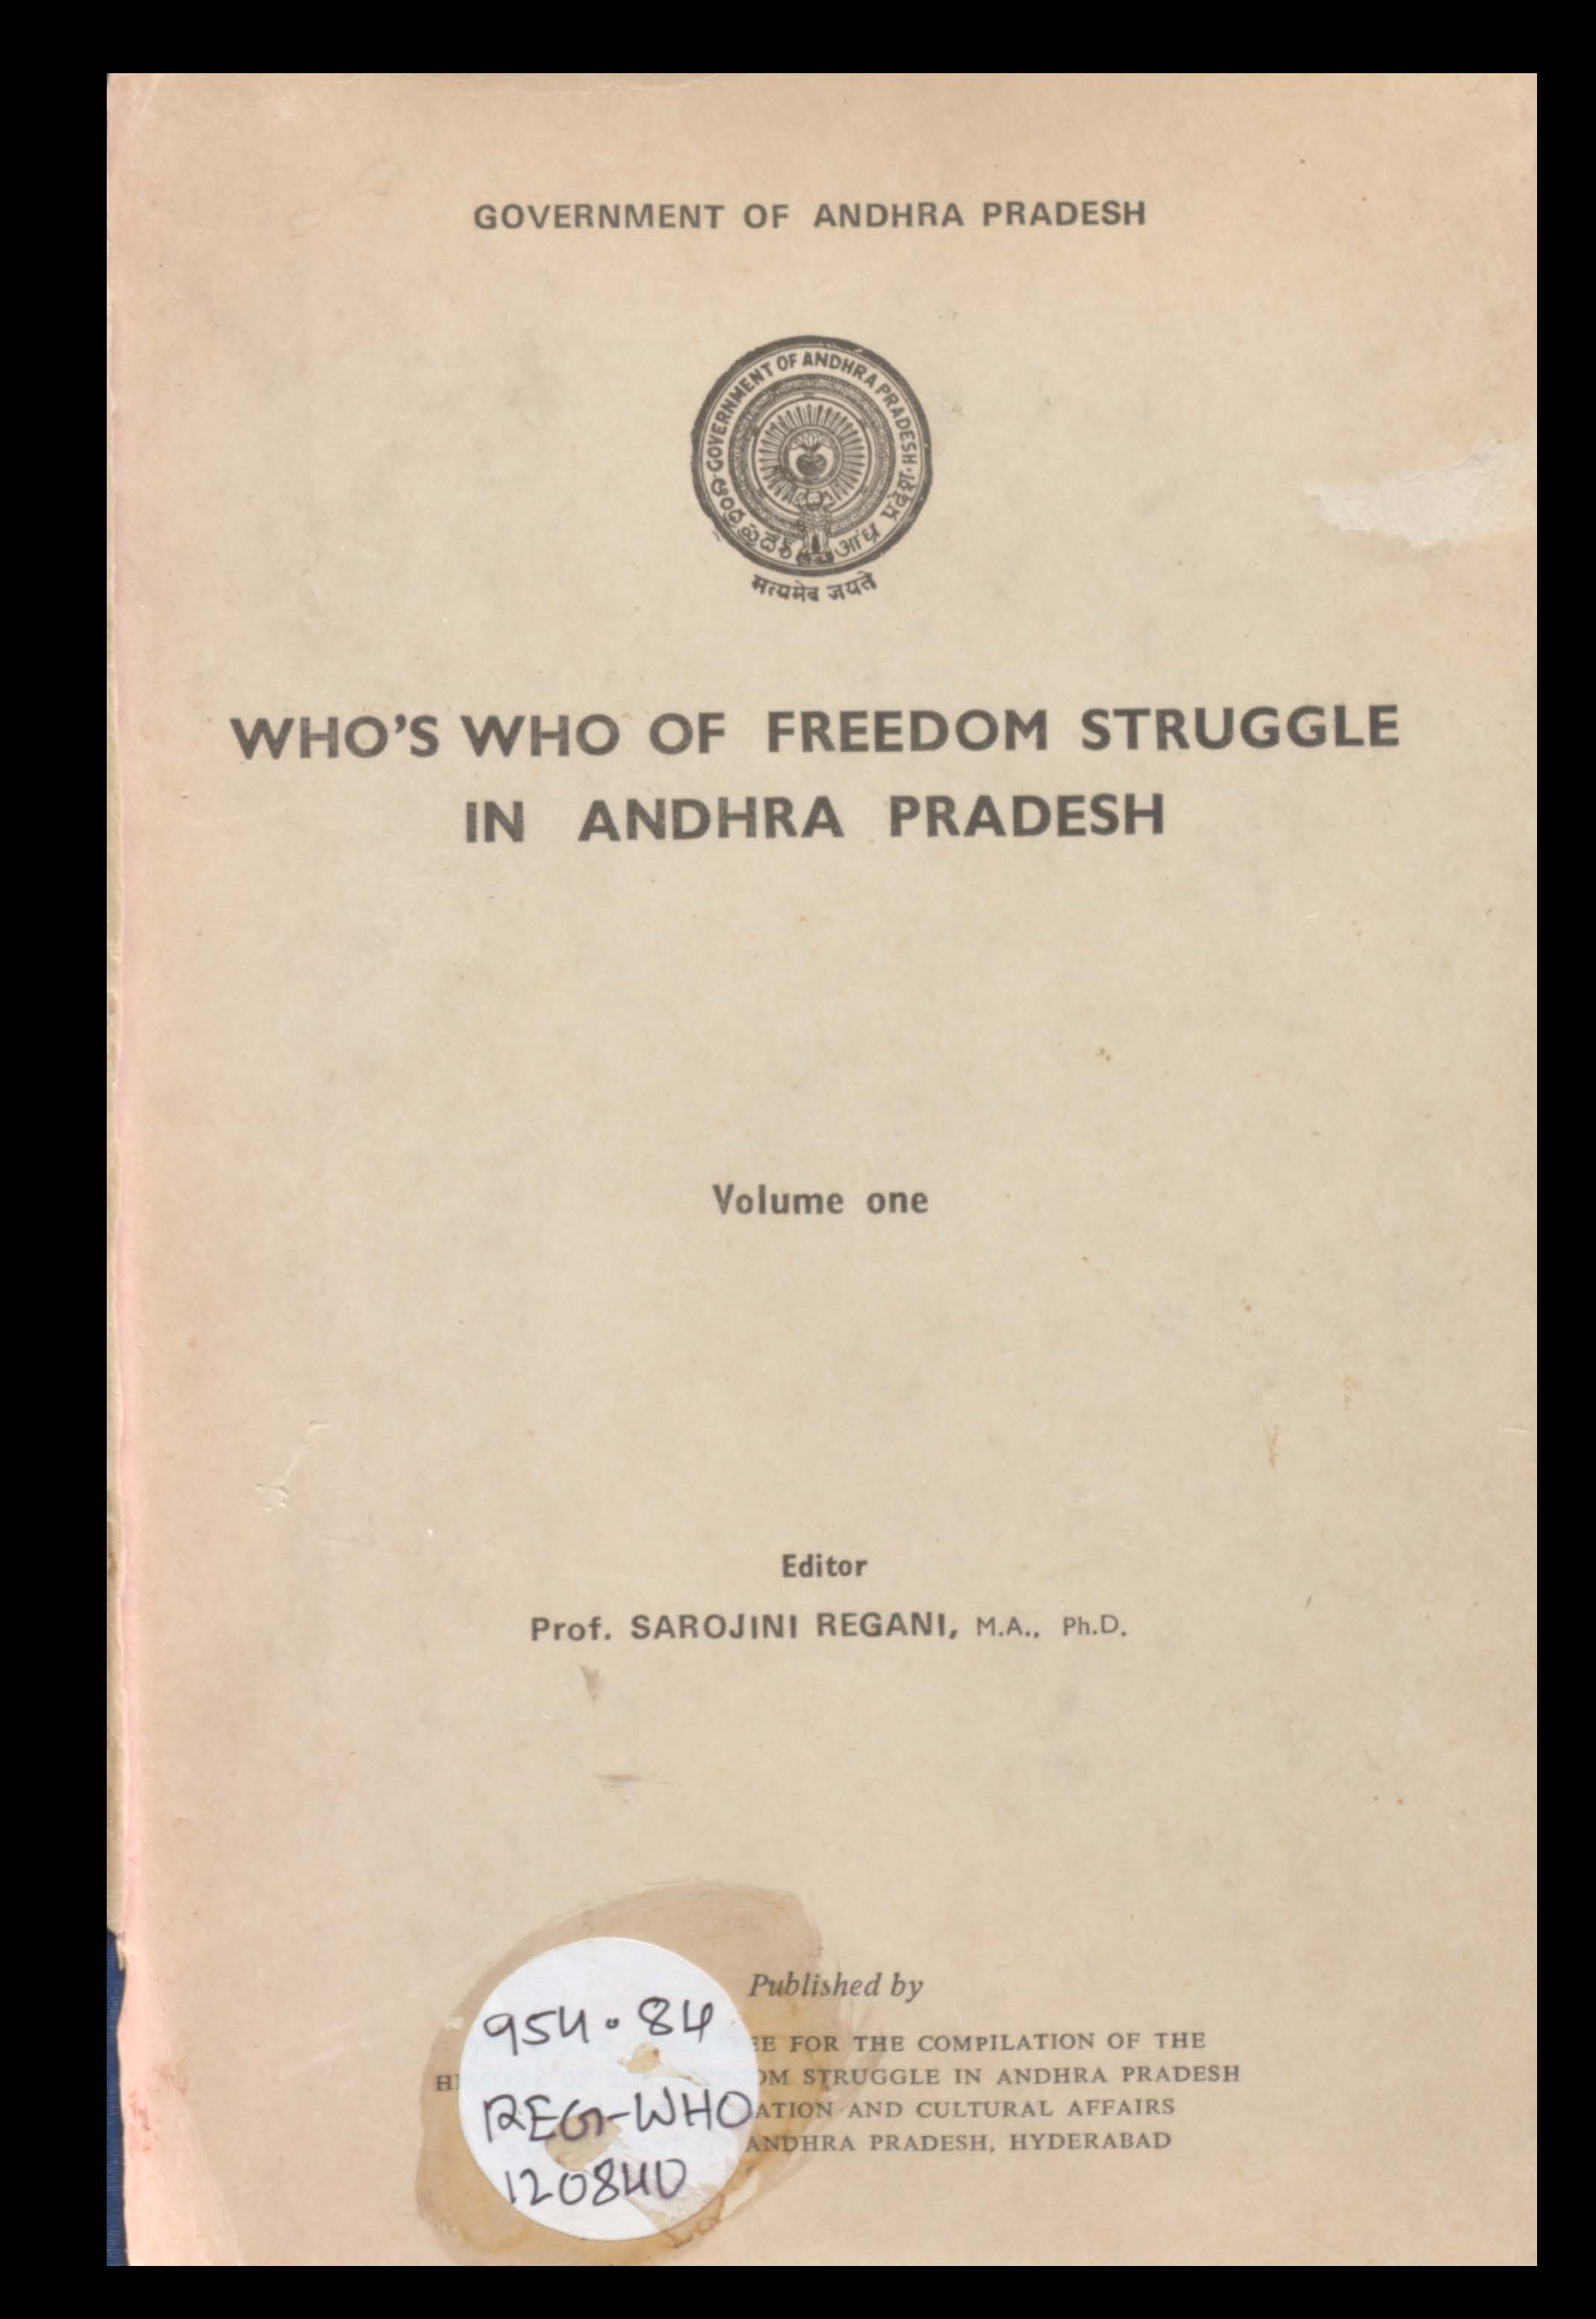 WHO'S WHO OF FREEDOM STRUGGLE IN ANDHRA PRADESH